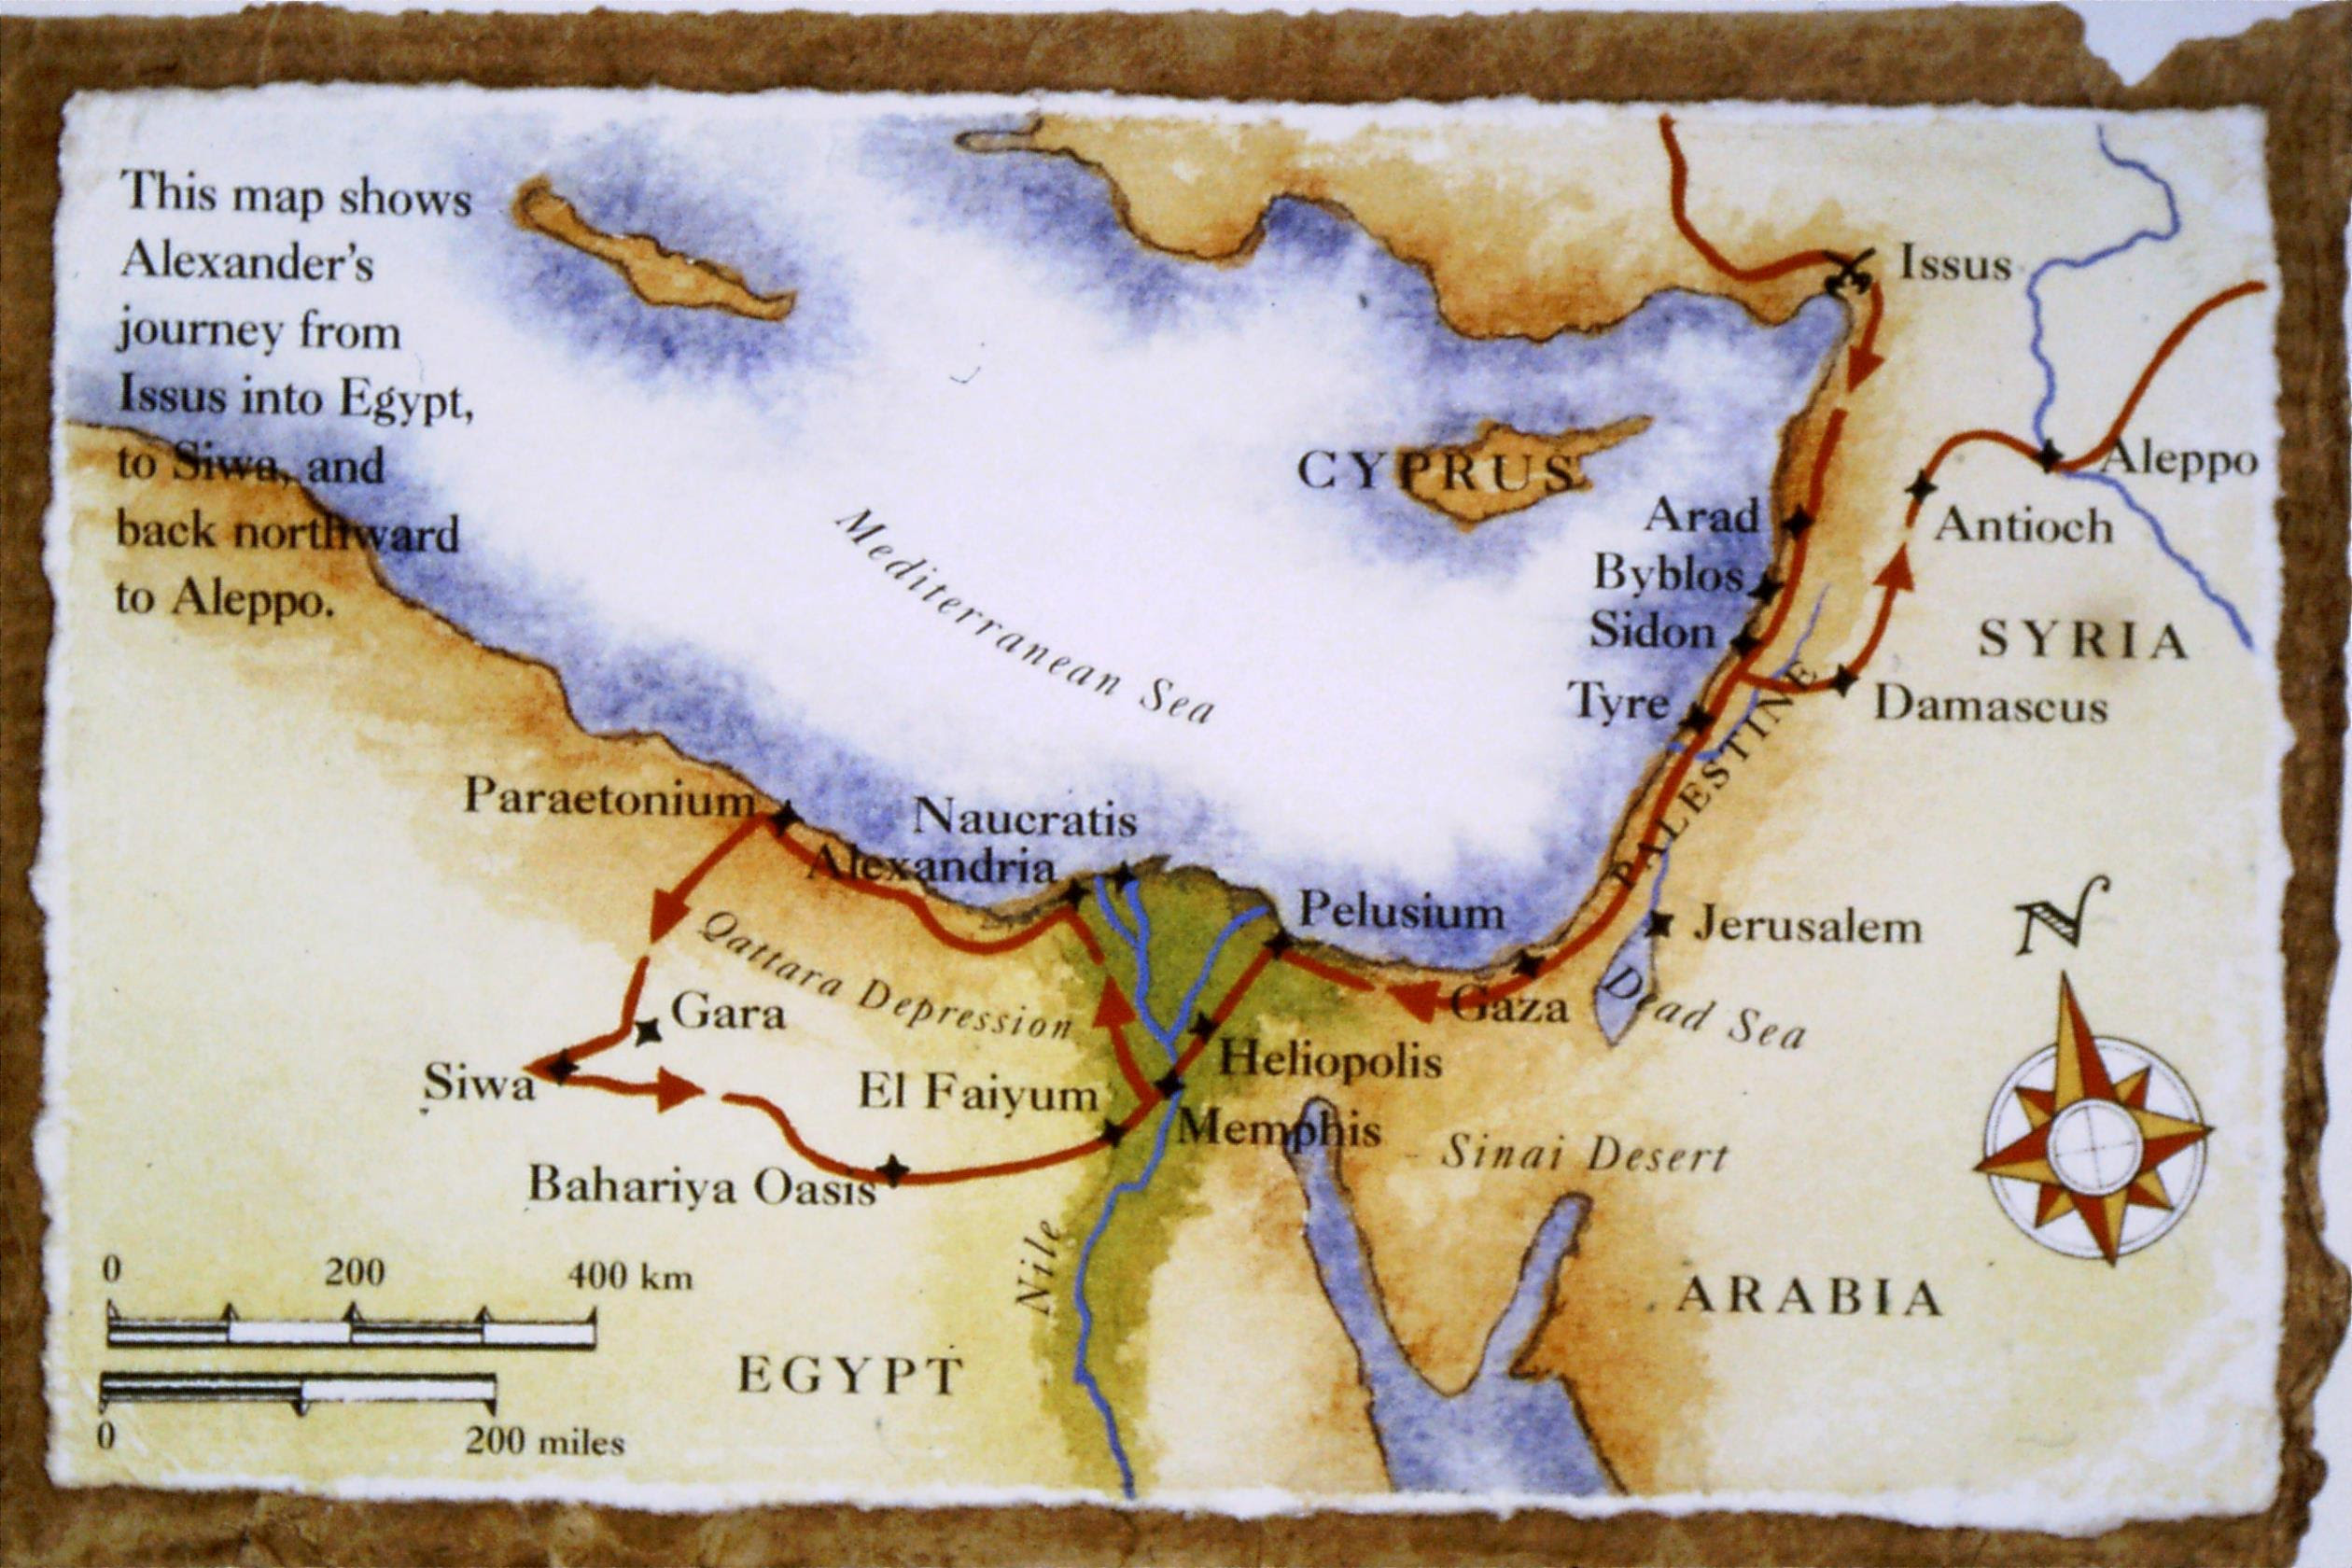  ALEXANDER'S JOURNEY FROM ISSUS TO SIWA